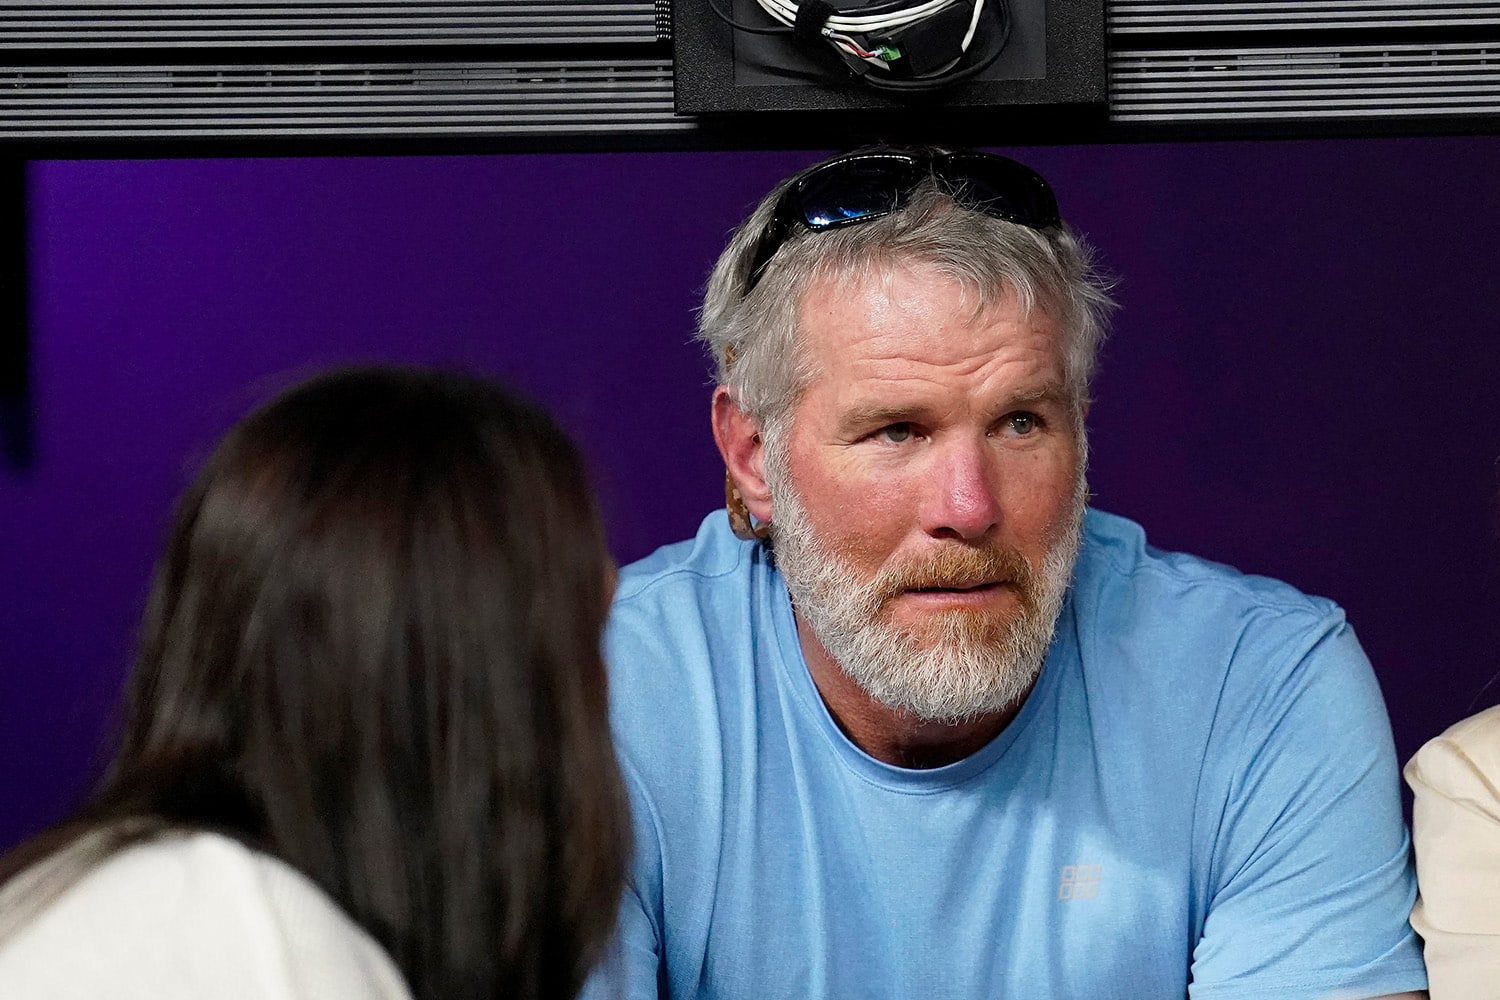 Former NFL quarterback, Brett Favre, is in an ongoing legal dispute over use of Mississippi state welfare funds